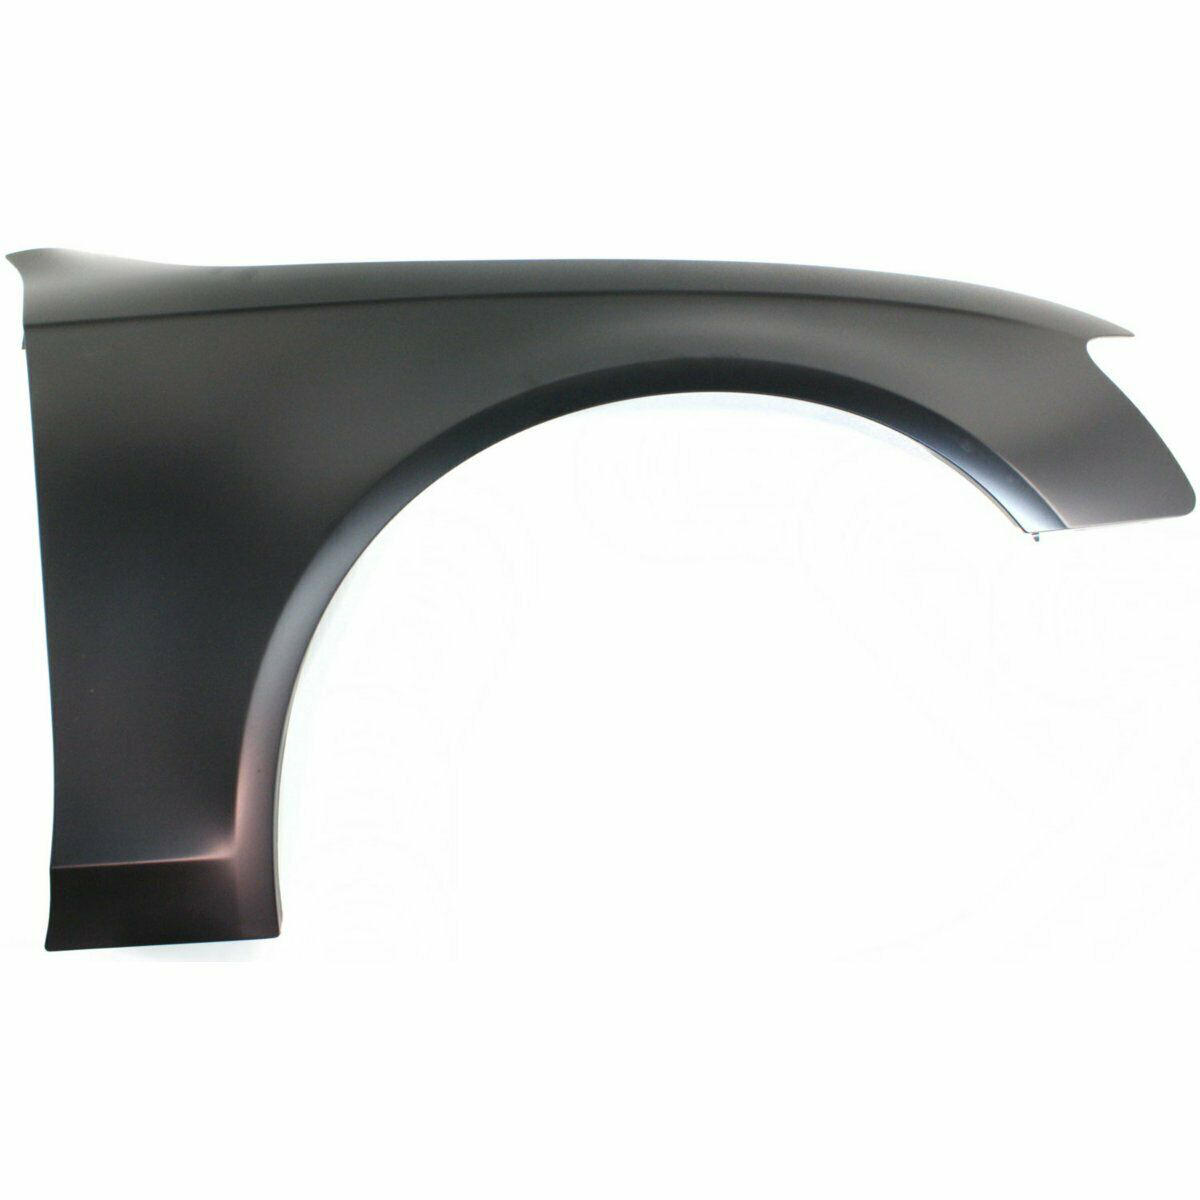 2009-2012 AUDI A4, Right Fender AU1241121 Painted to Match